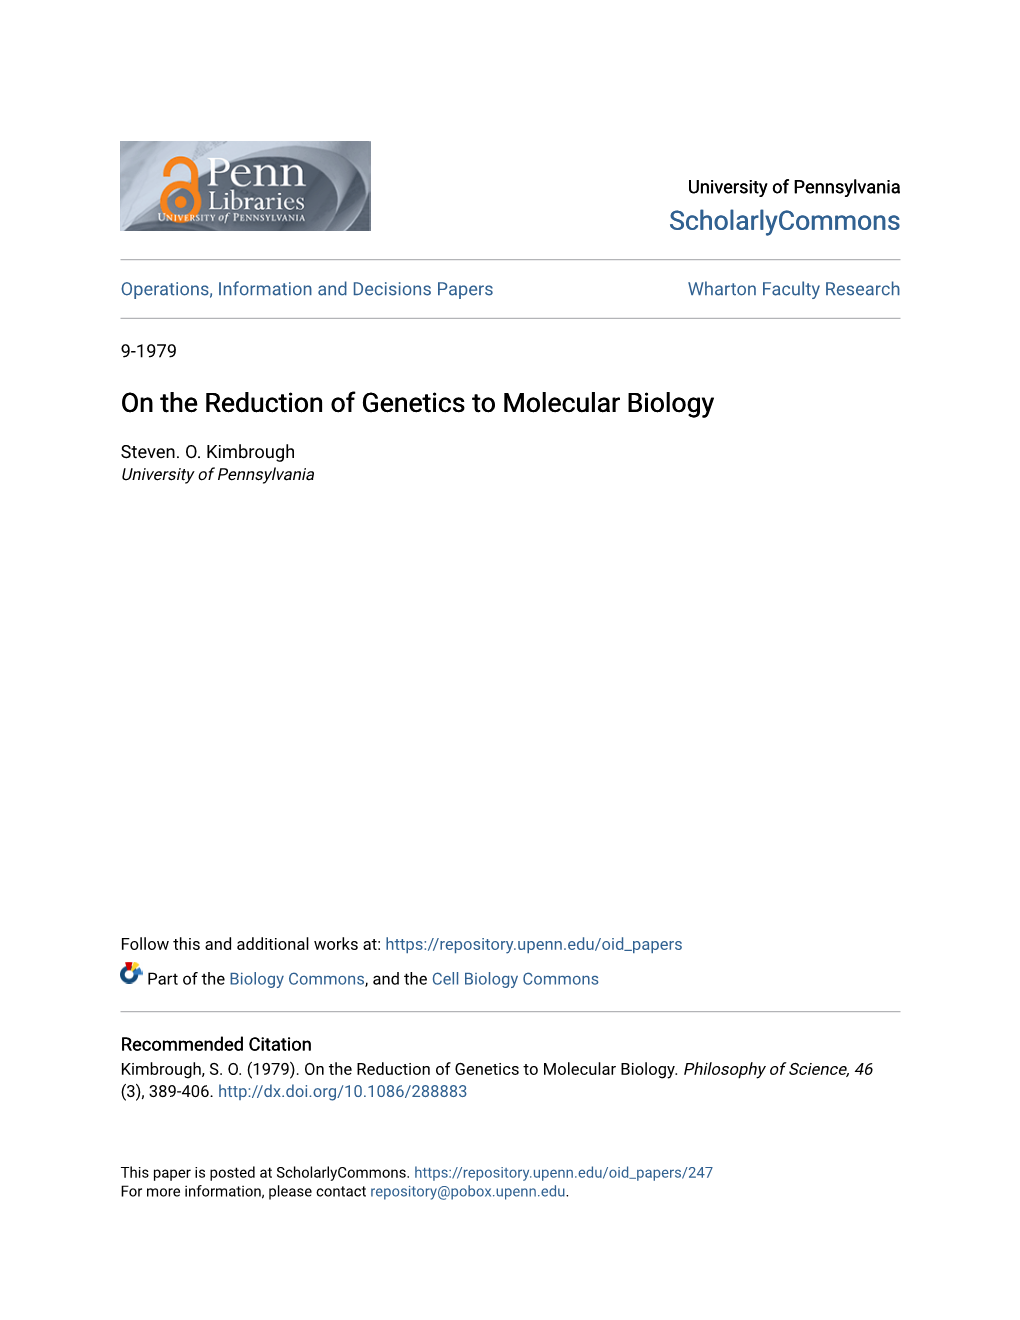 On the Reduction of Genetics to Molecular Biology